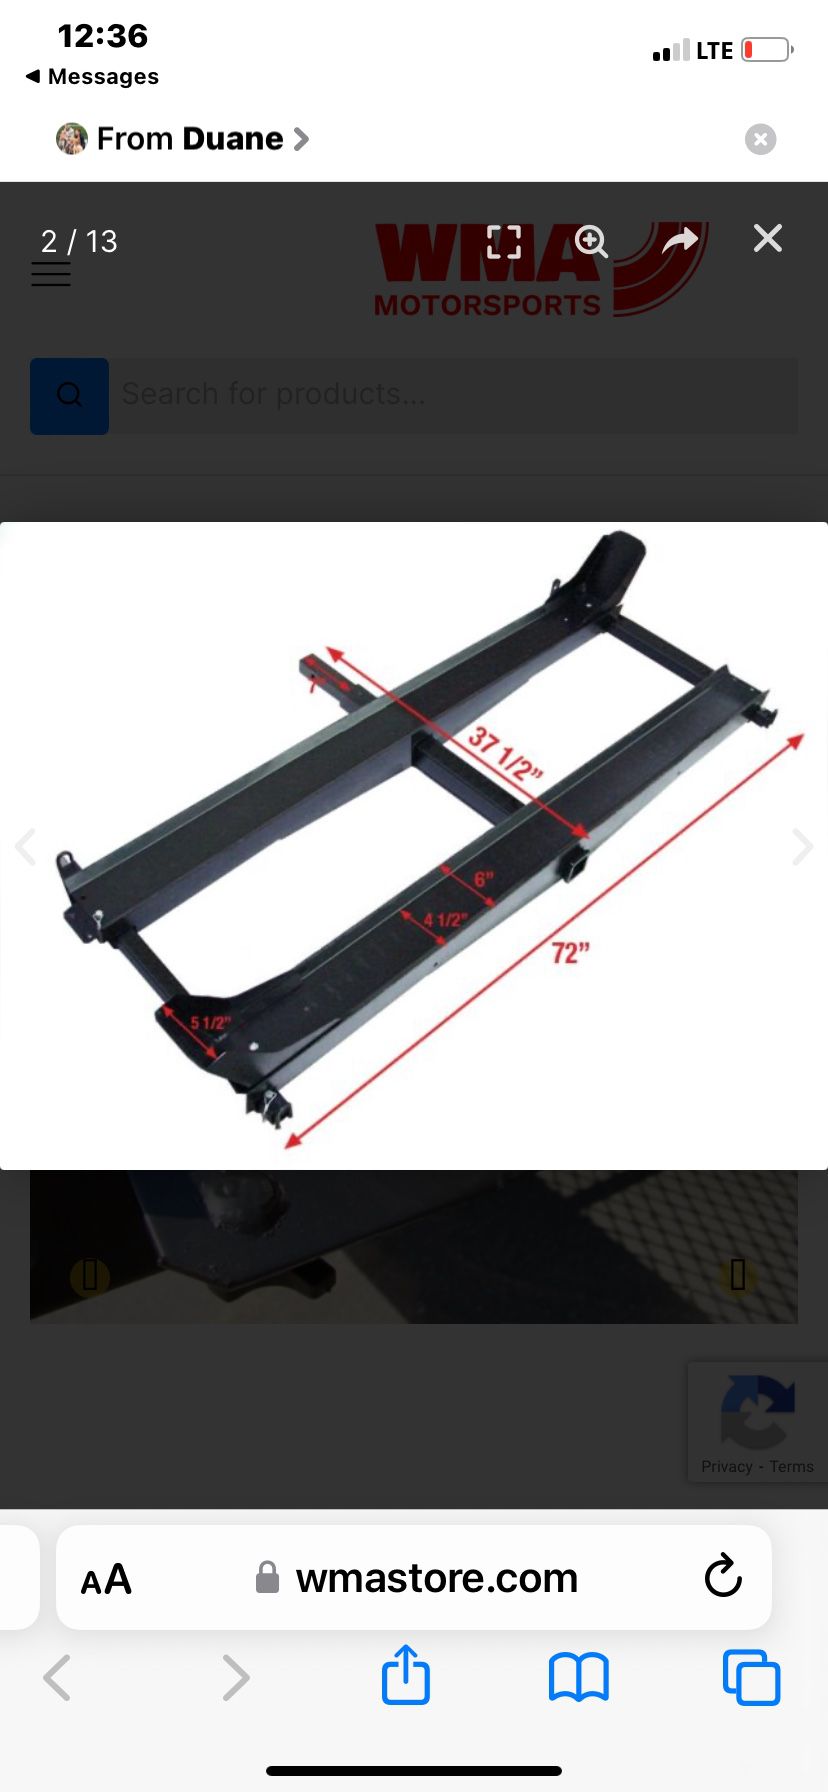 Dual Dirt Bike Rack Holders  With Towing Receiver.